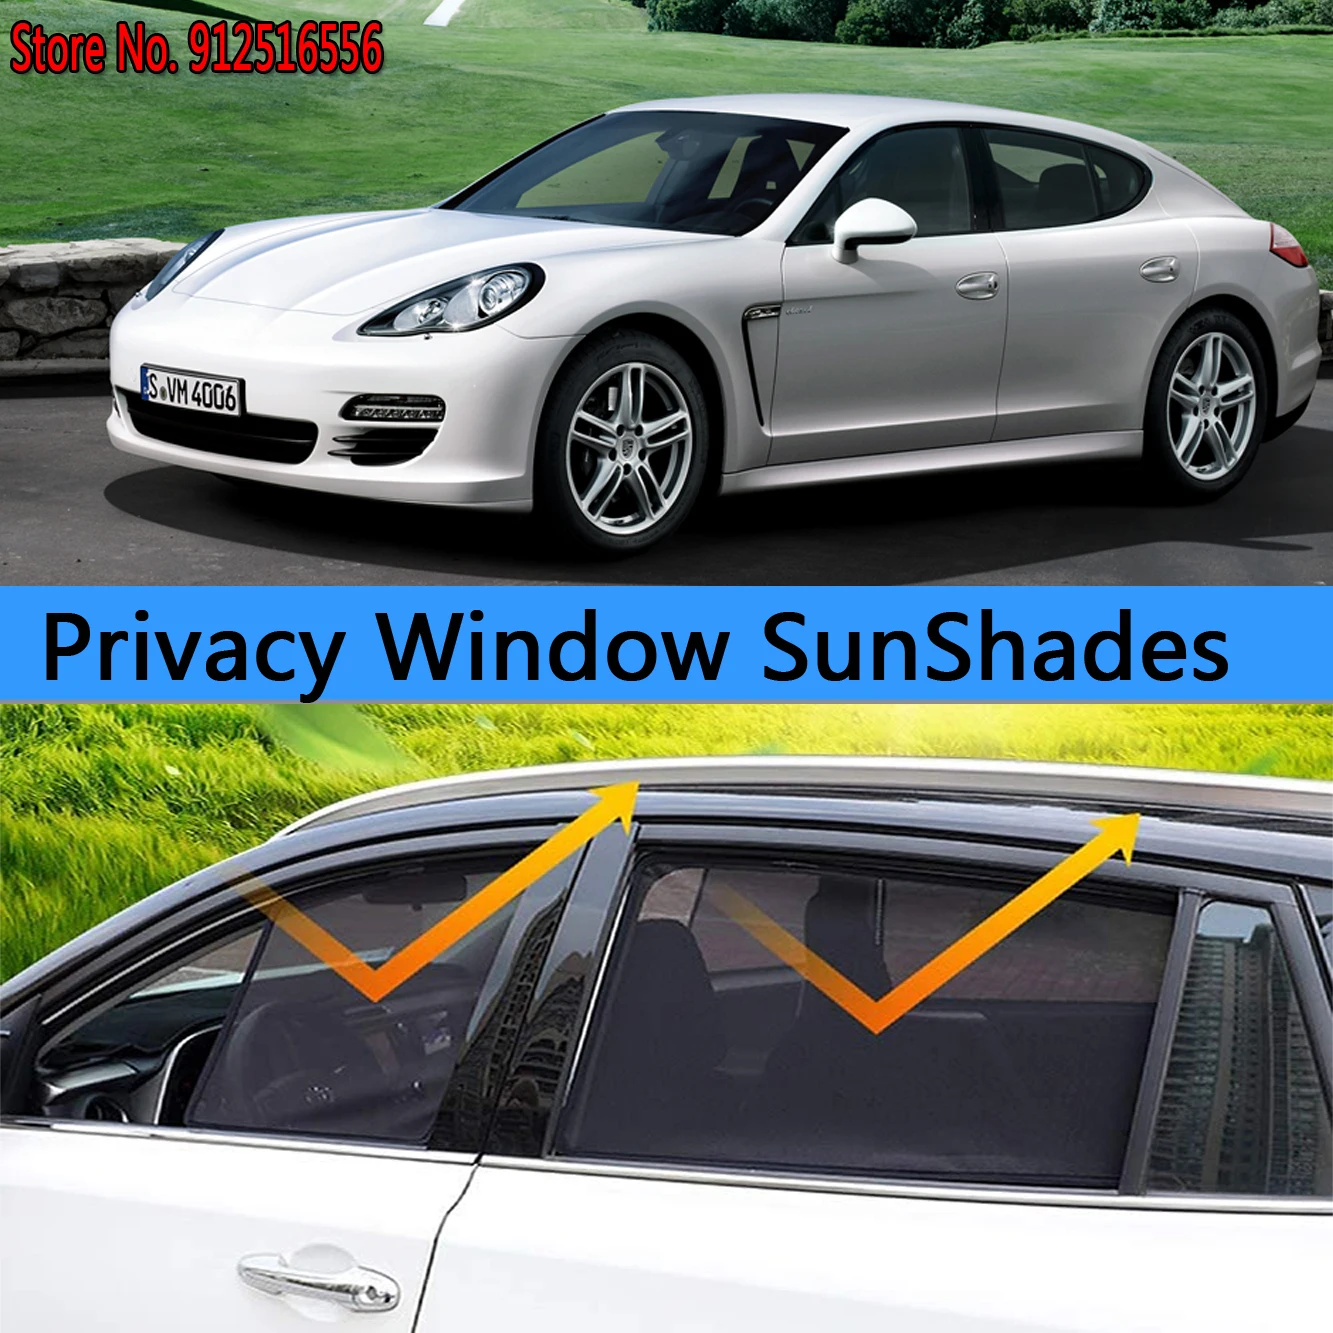 

Side Sun Shade Shading Protection Window SunShades Sunshield Car Accseeories For Porsche Panamera 970 2010 2012 2014 2015 2016